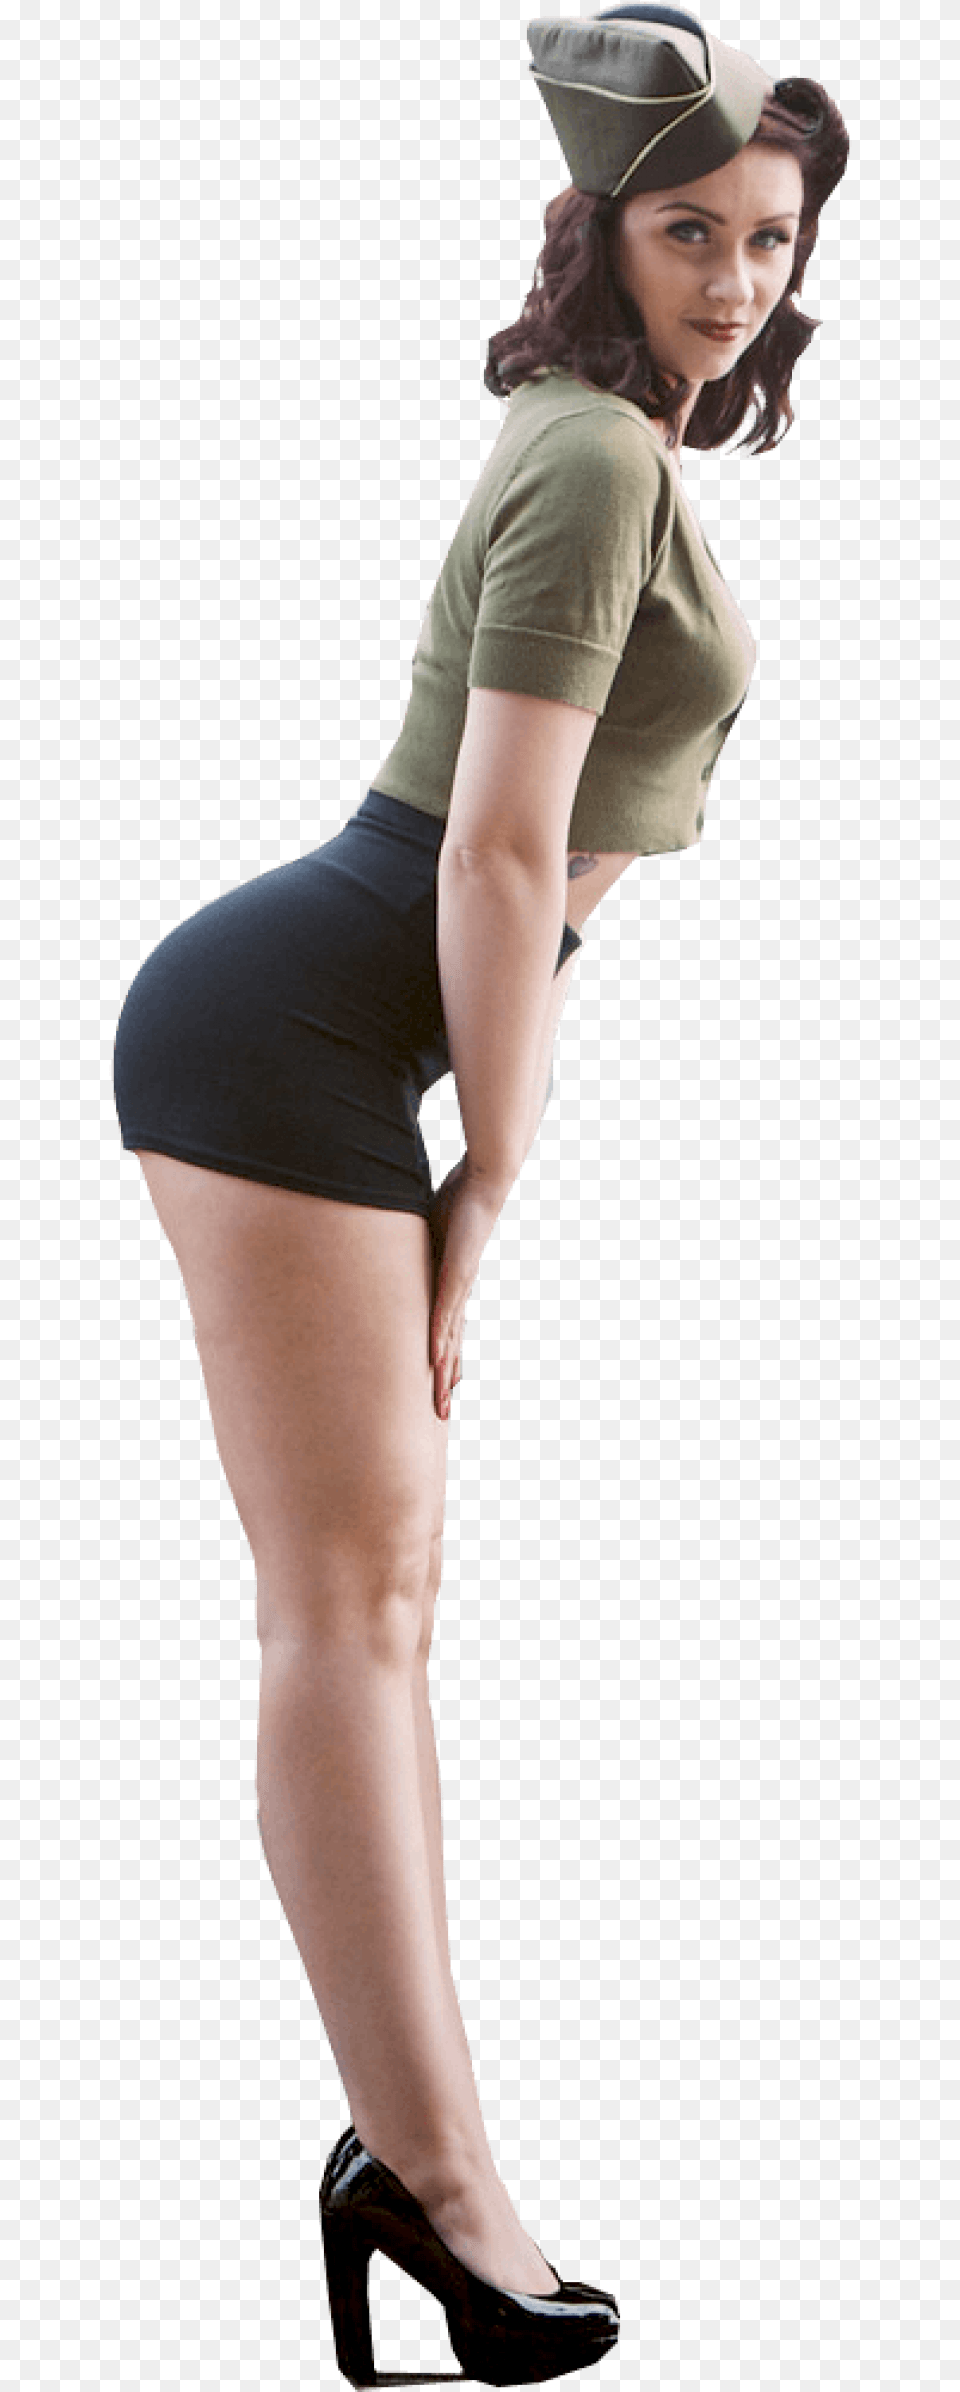 Pinup Woman Image Girl Cut Out, Adult, Skirt, Shoe, Person Free Transparent Png